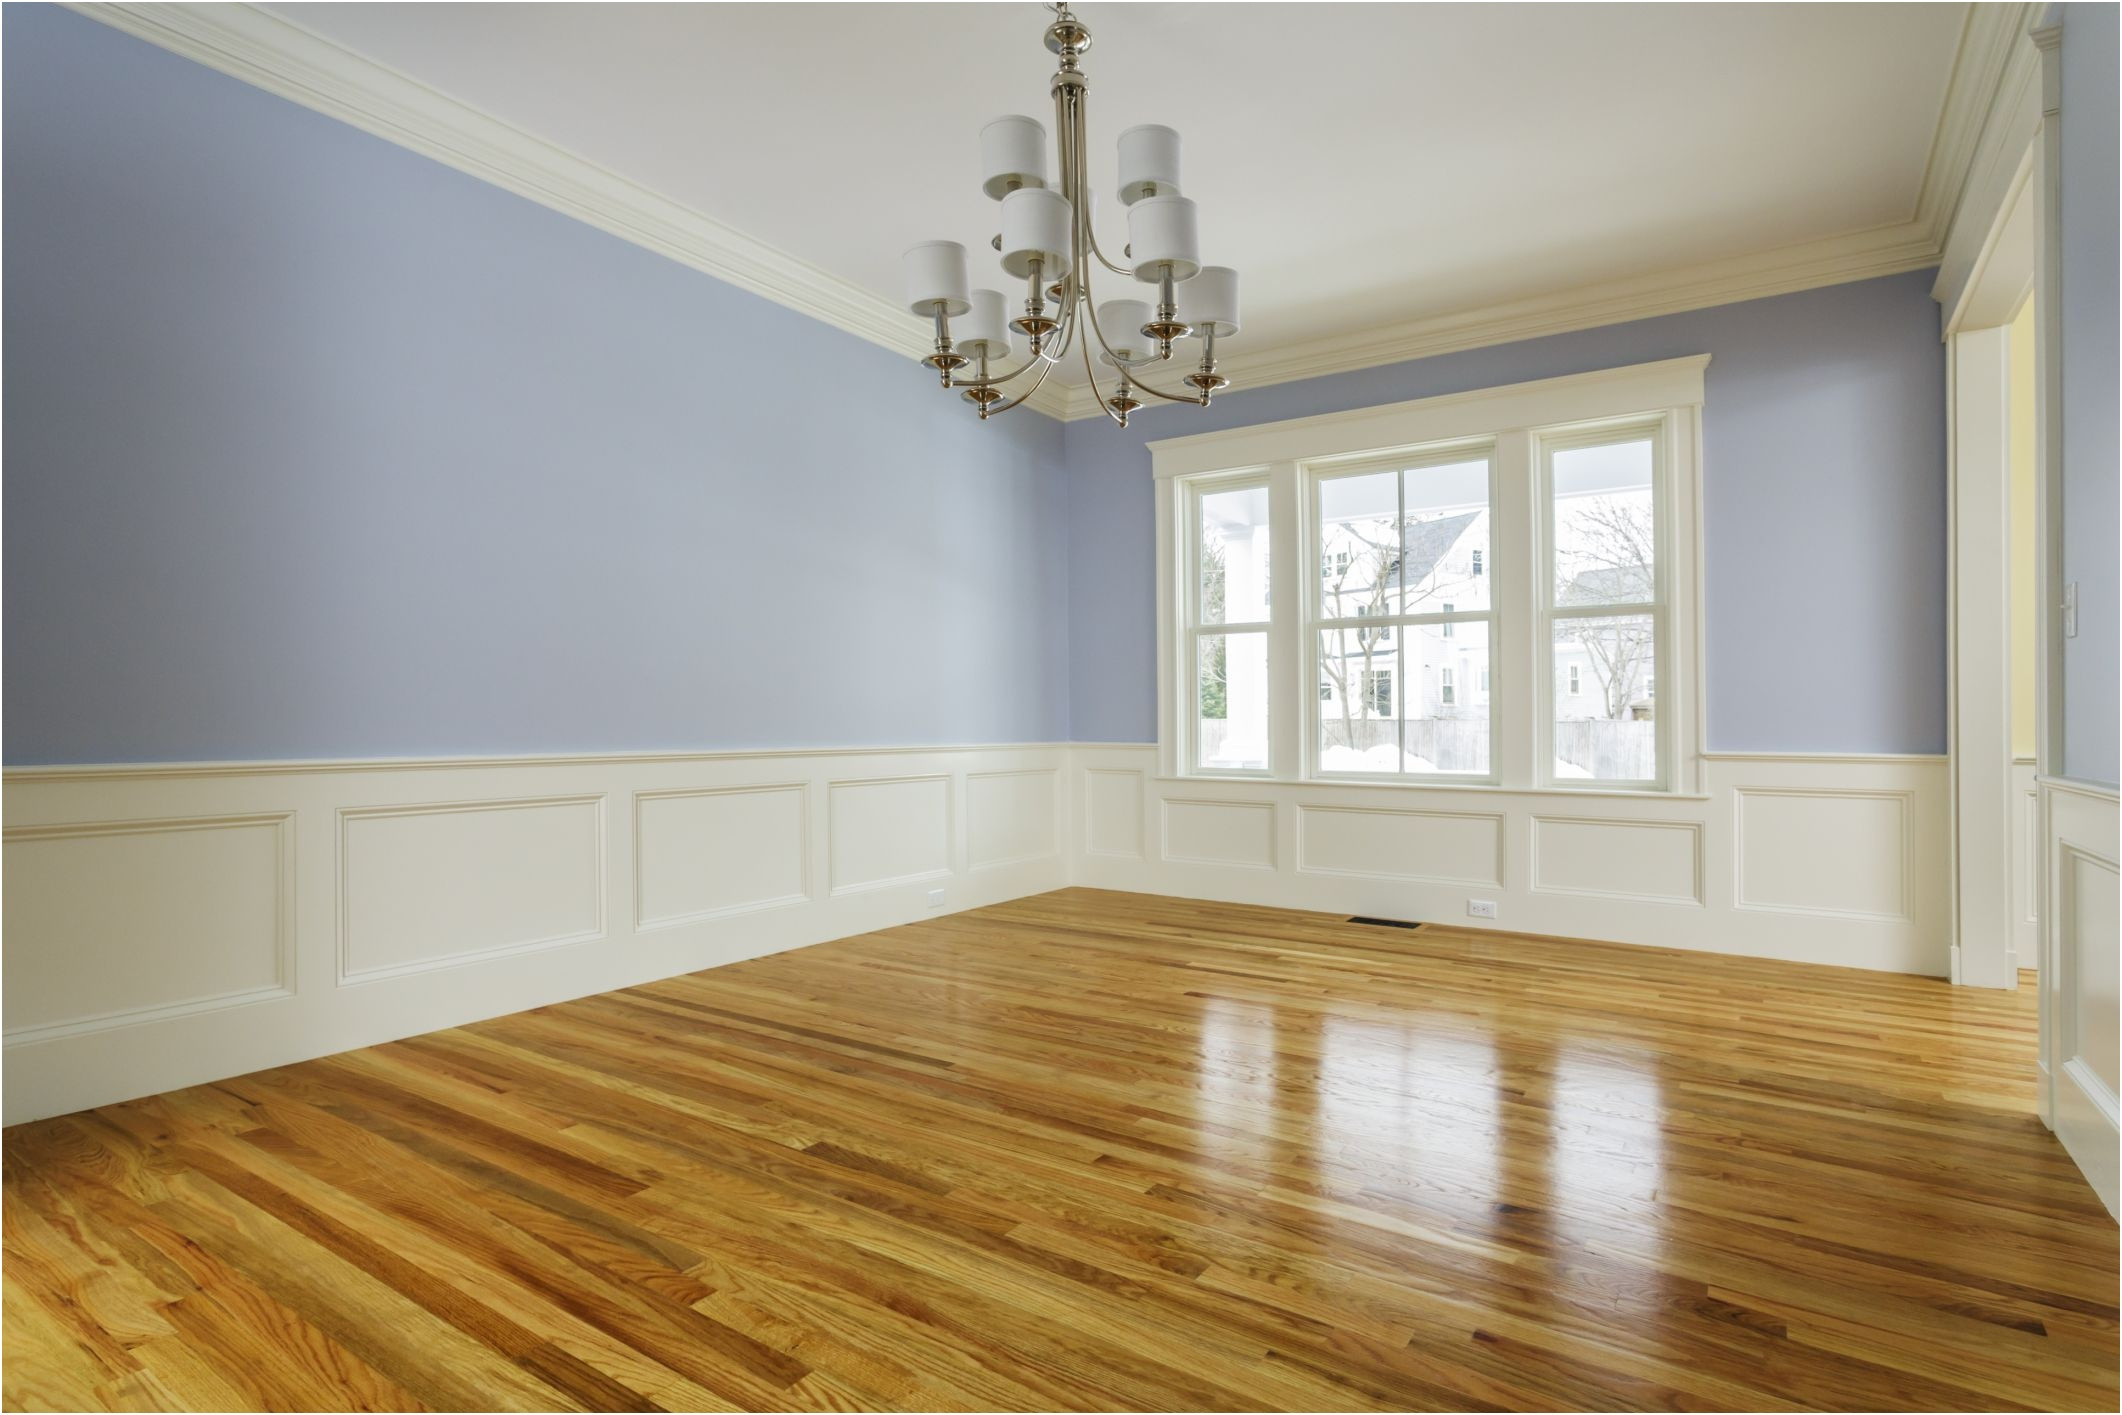 11 Wonderful Hardwood Floor Refinishing Waterbury Ct 2024 free download hardwood floor refinishing waterbury ct of solid wood flooring white washed oak elegant here s the cost to throughout solid wood flooring white washed oak elegant here s the cost to refinish